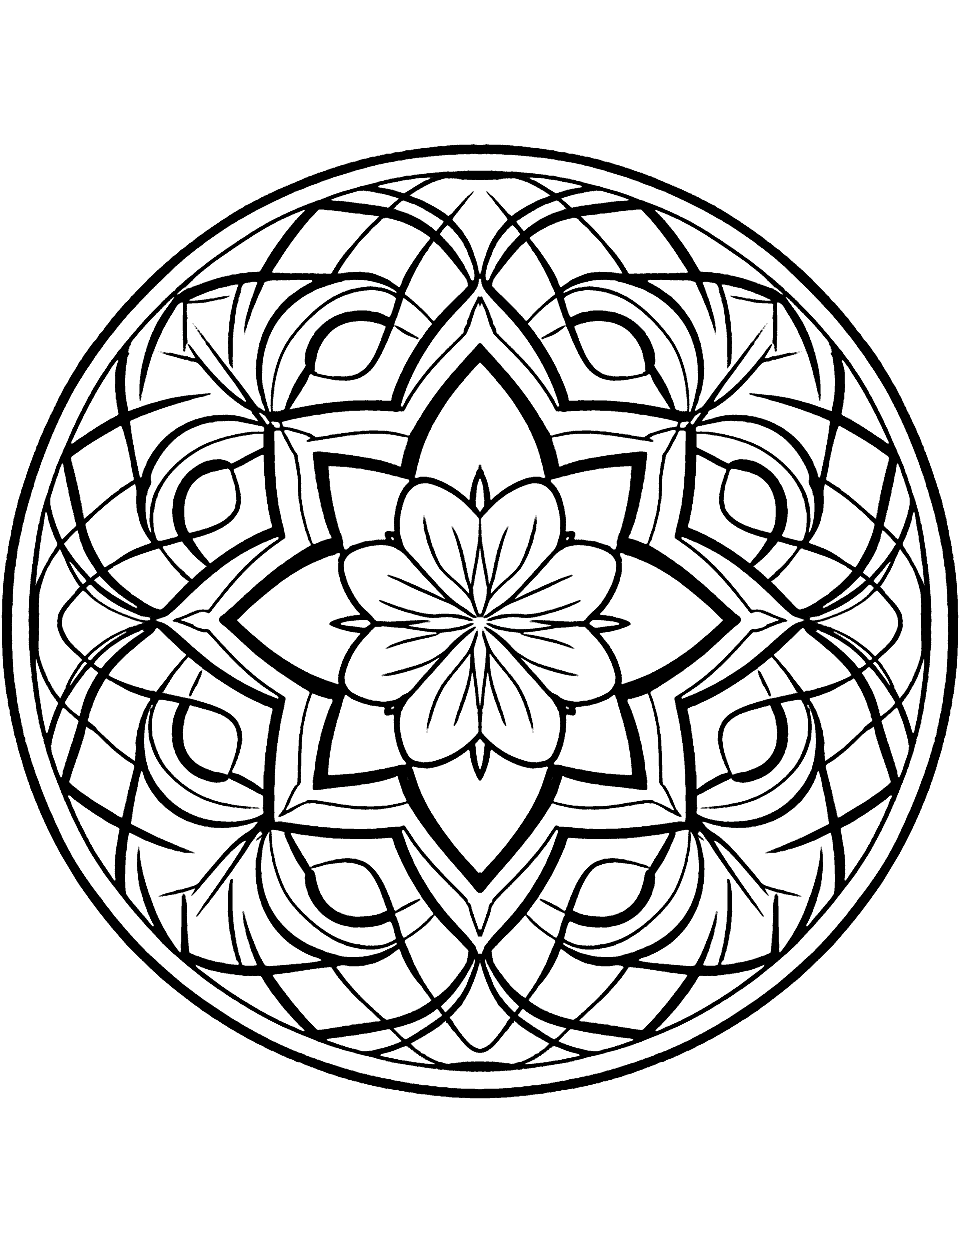 Advanced Geometric Mandala Coloring Page - A challenging mandala design filled with geometric shapes and patterns for older kids to tackle.